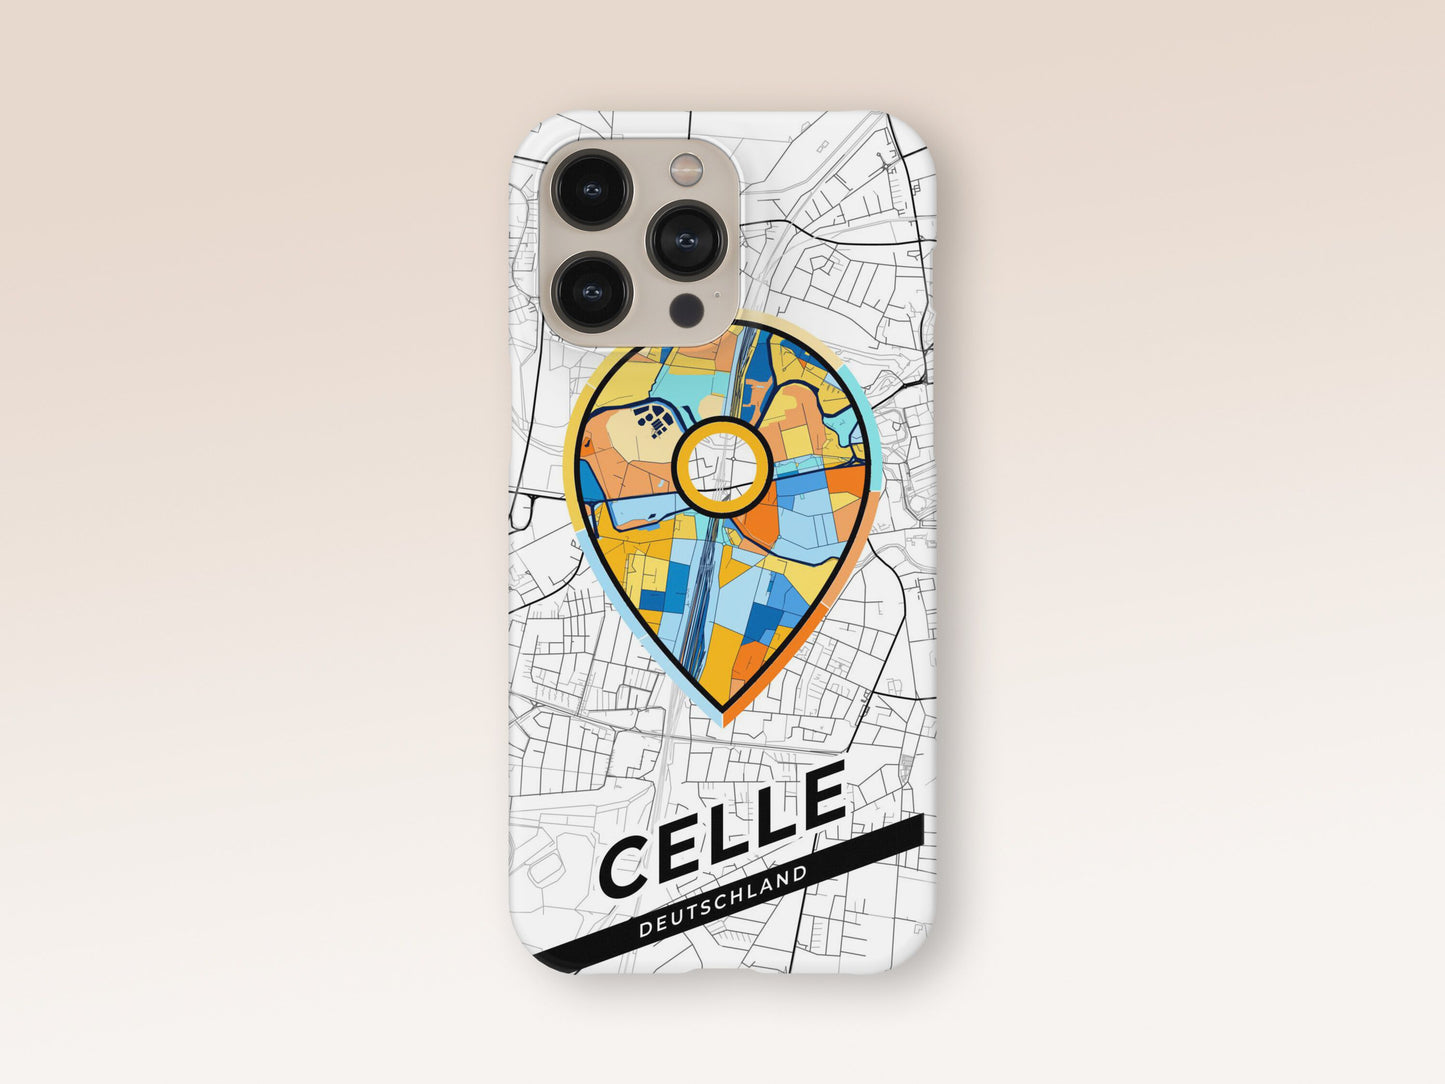 Celle Deutschland slim phone case with colorful icon. Birthday, wedding or housewarming gift. Couple match cases. 1